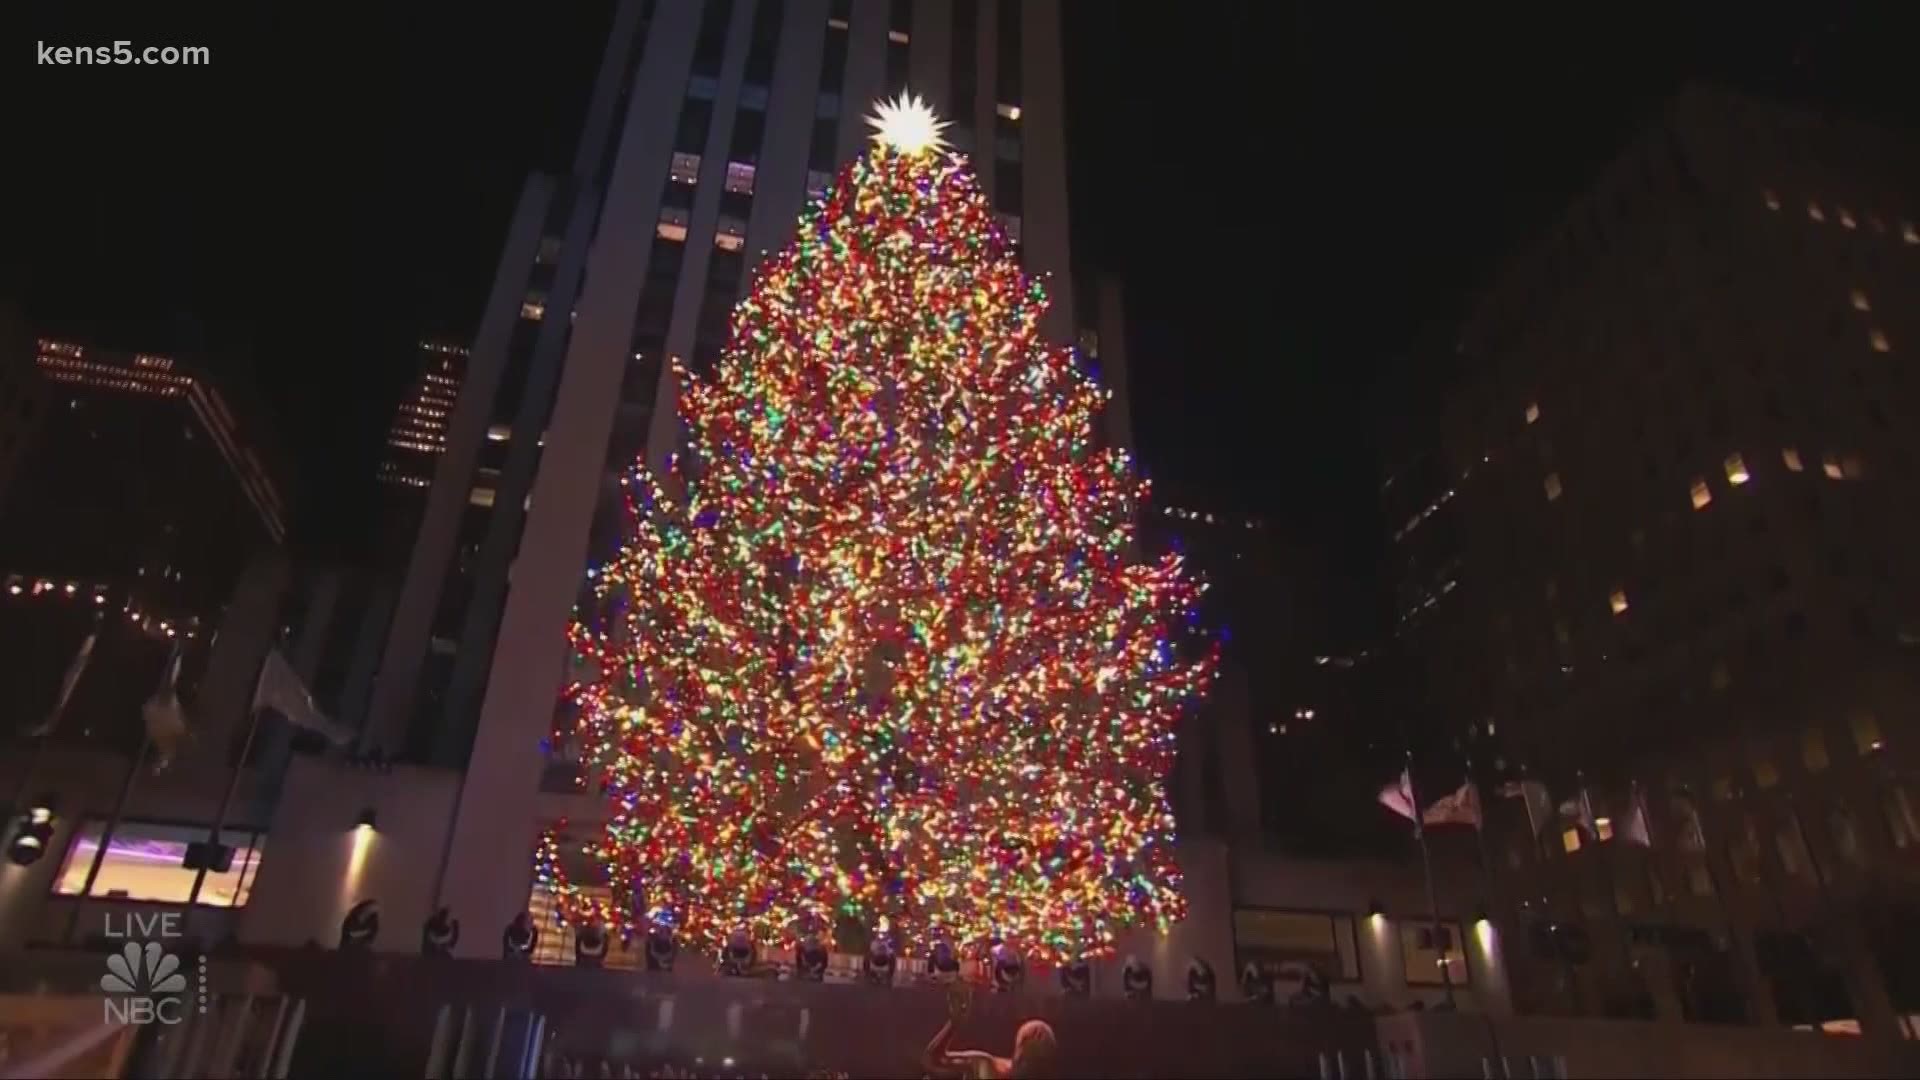 There are 22 days until Christmas and a couple of the country's most famous trees are officially lit.